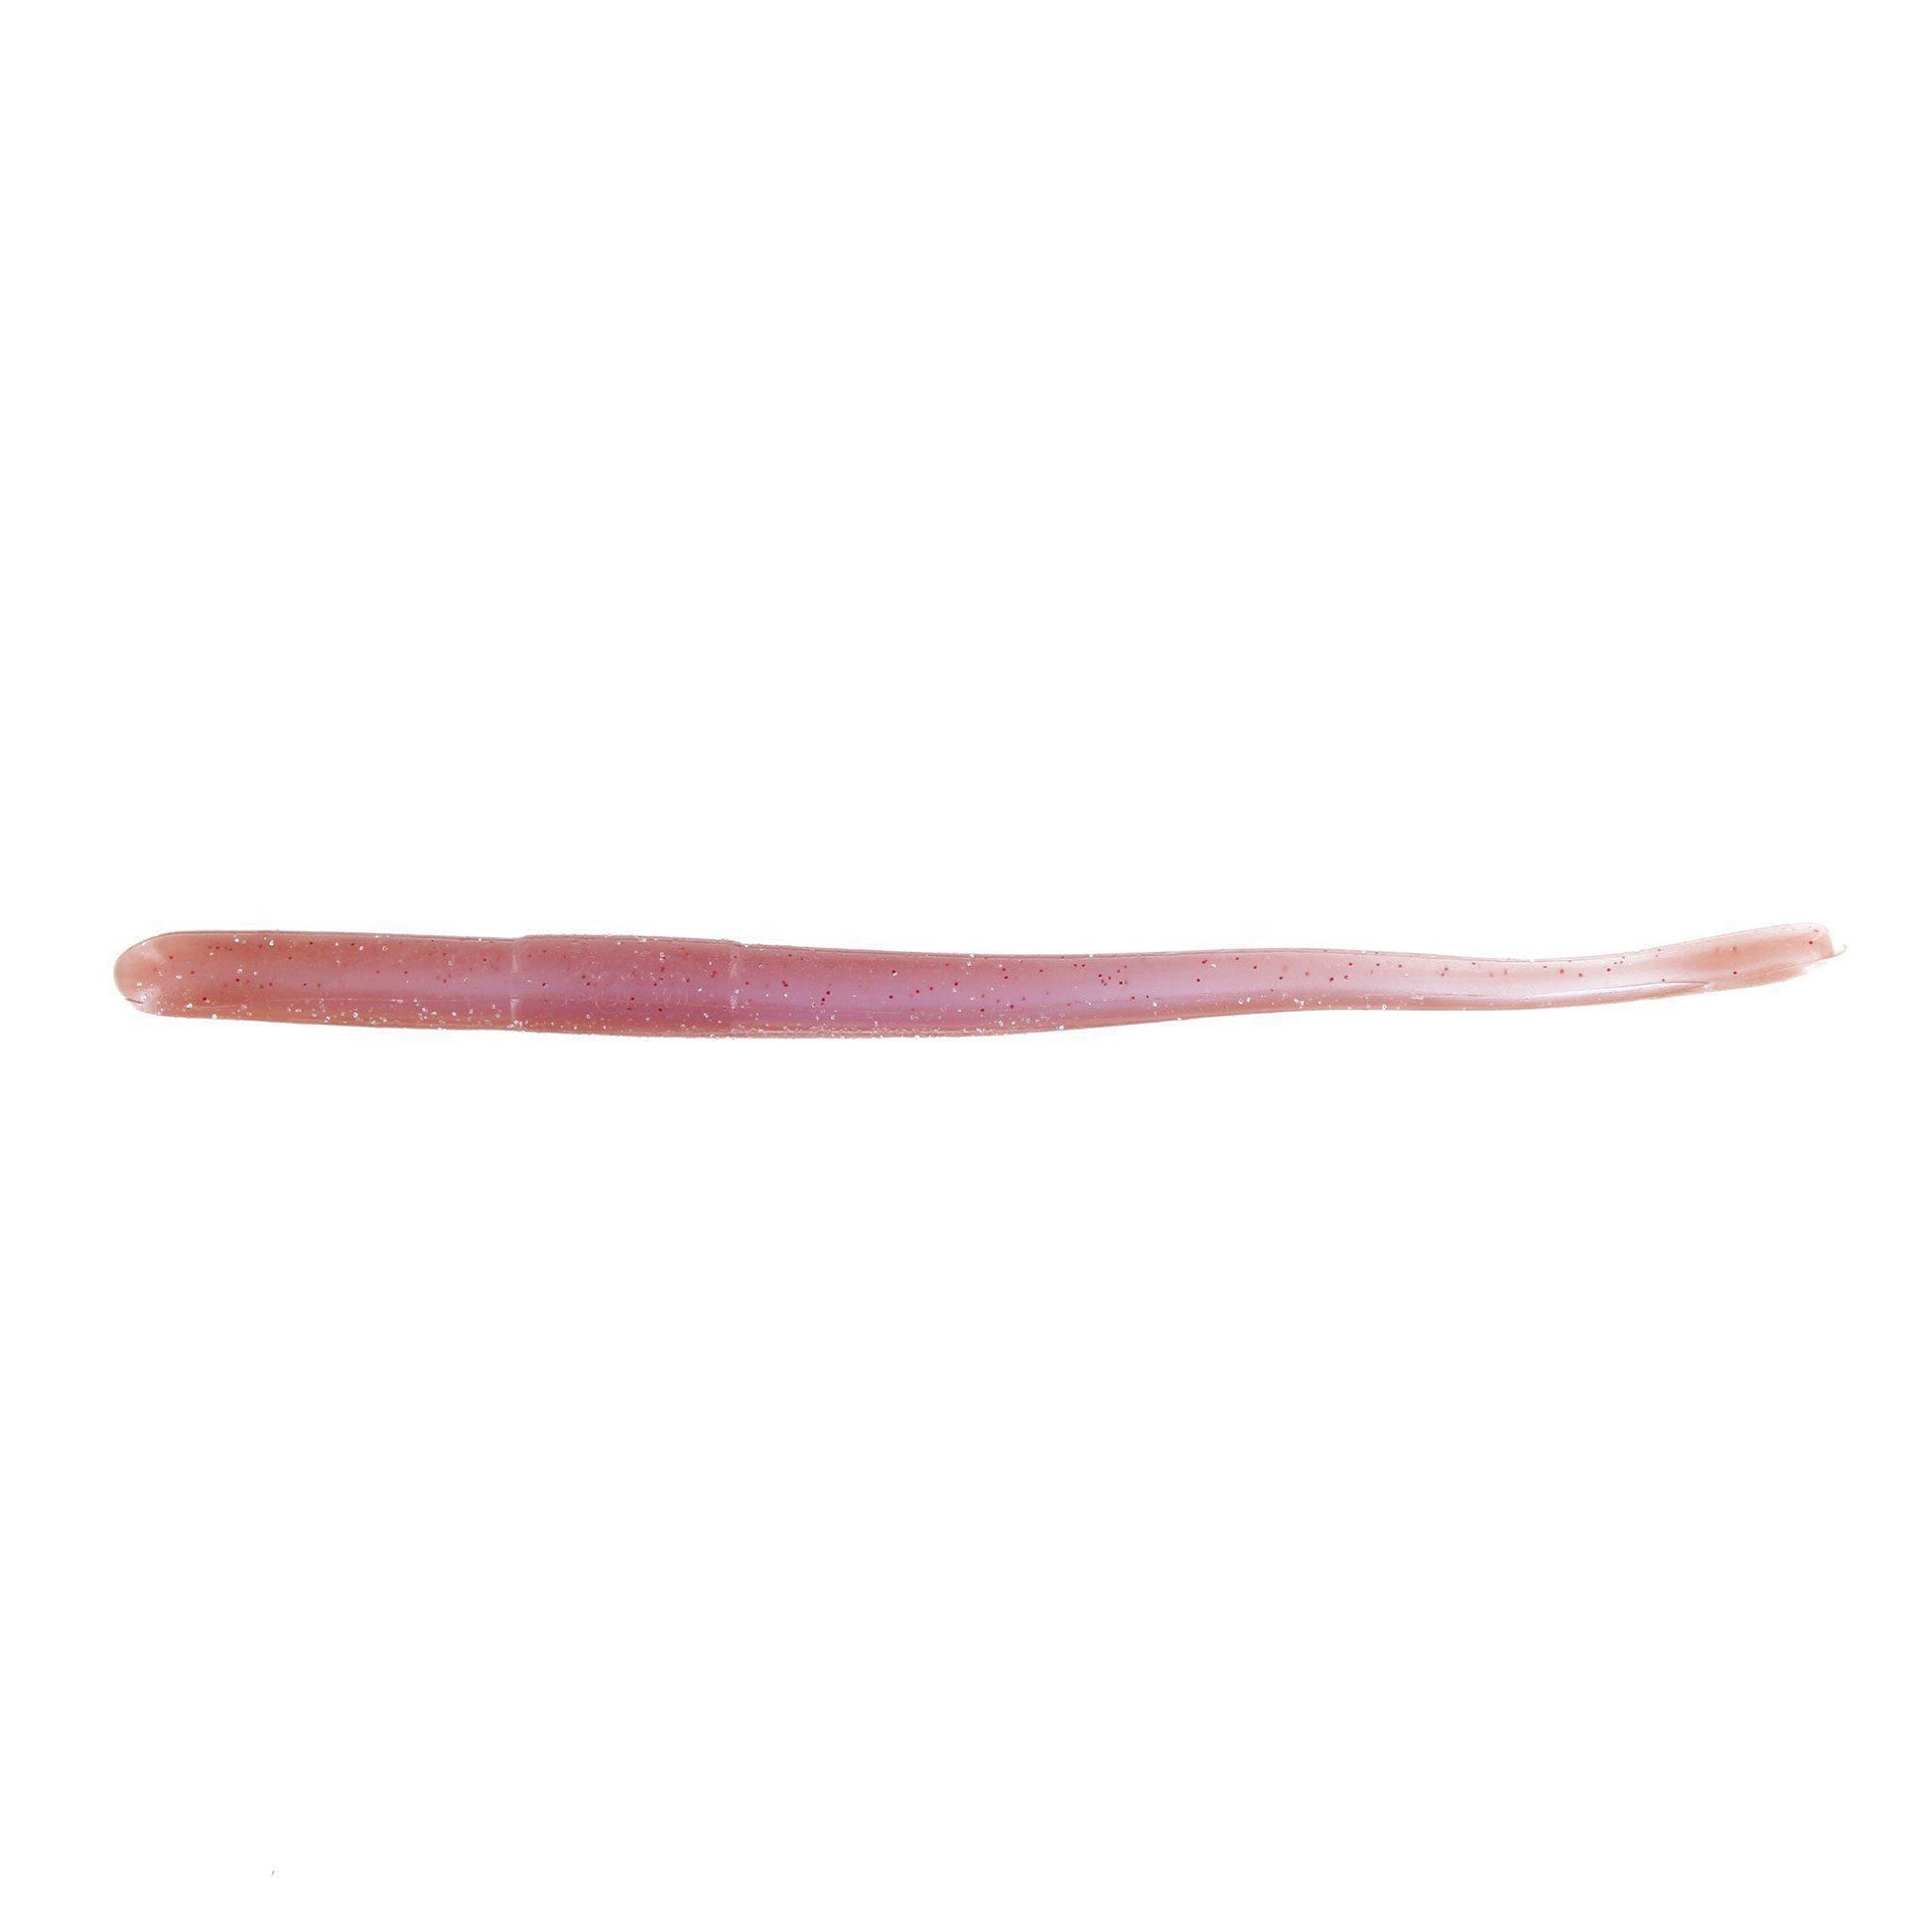 Roboworm Straight Tail 4.5 St-A2Ar Oxblood Light/Red Flk. 10Pk